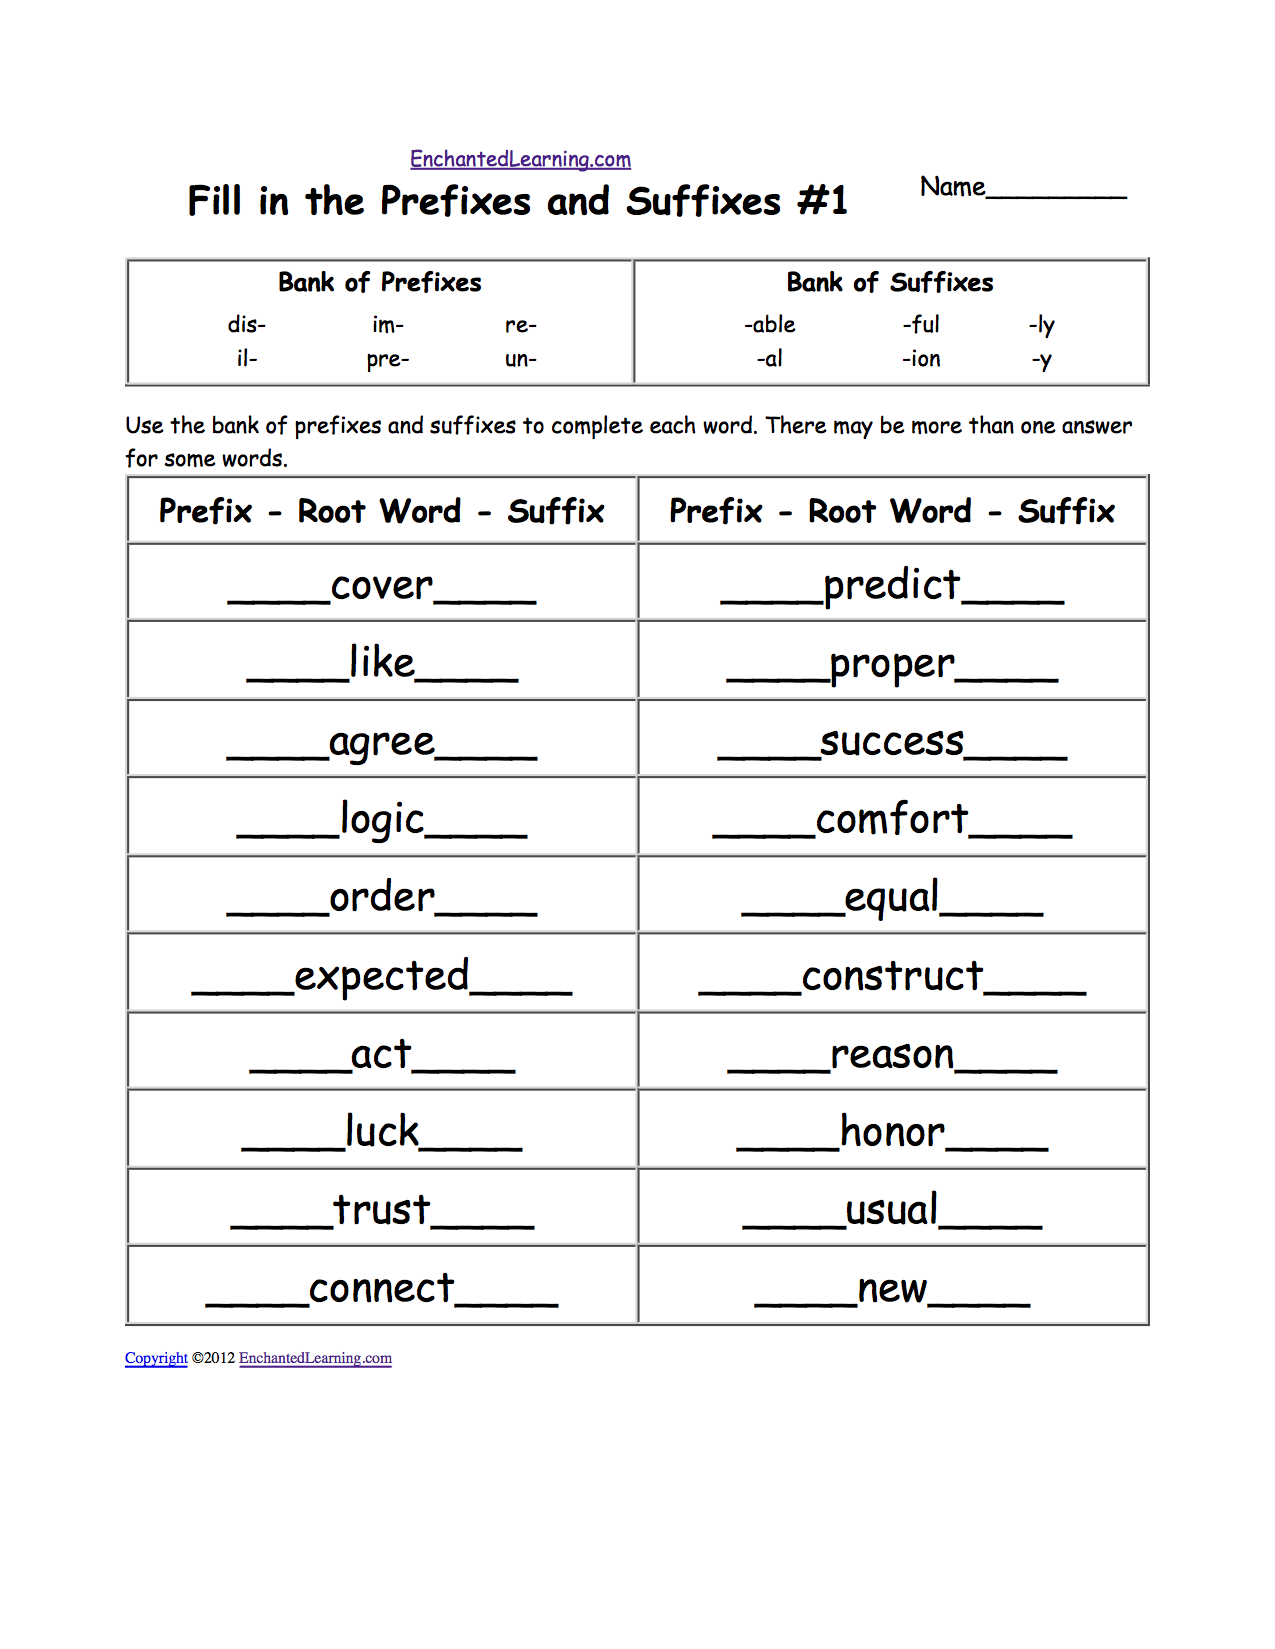 Fill in the Prefixes and Suffixes #1